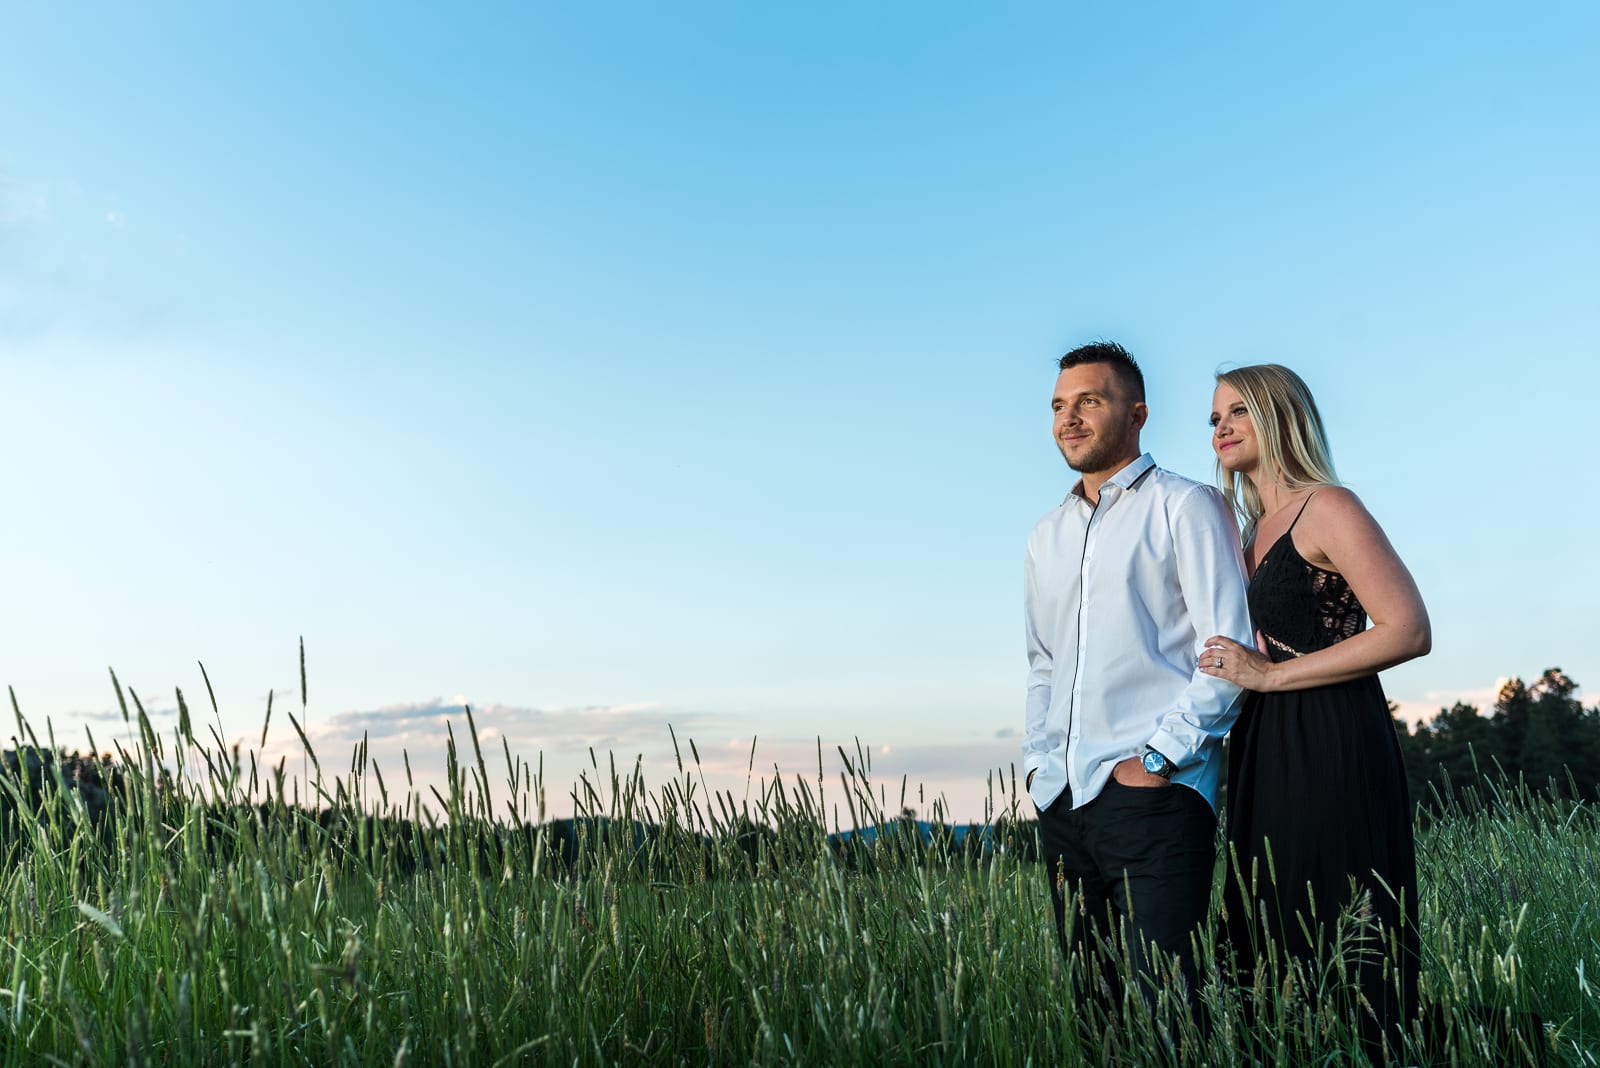 A Galactic Engagement | Engagement | Alderfer Park | From the Hip Photo